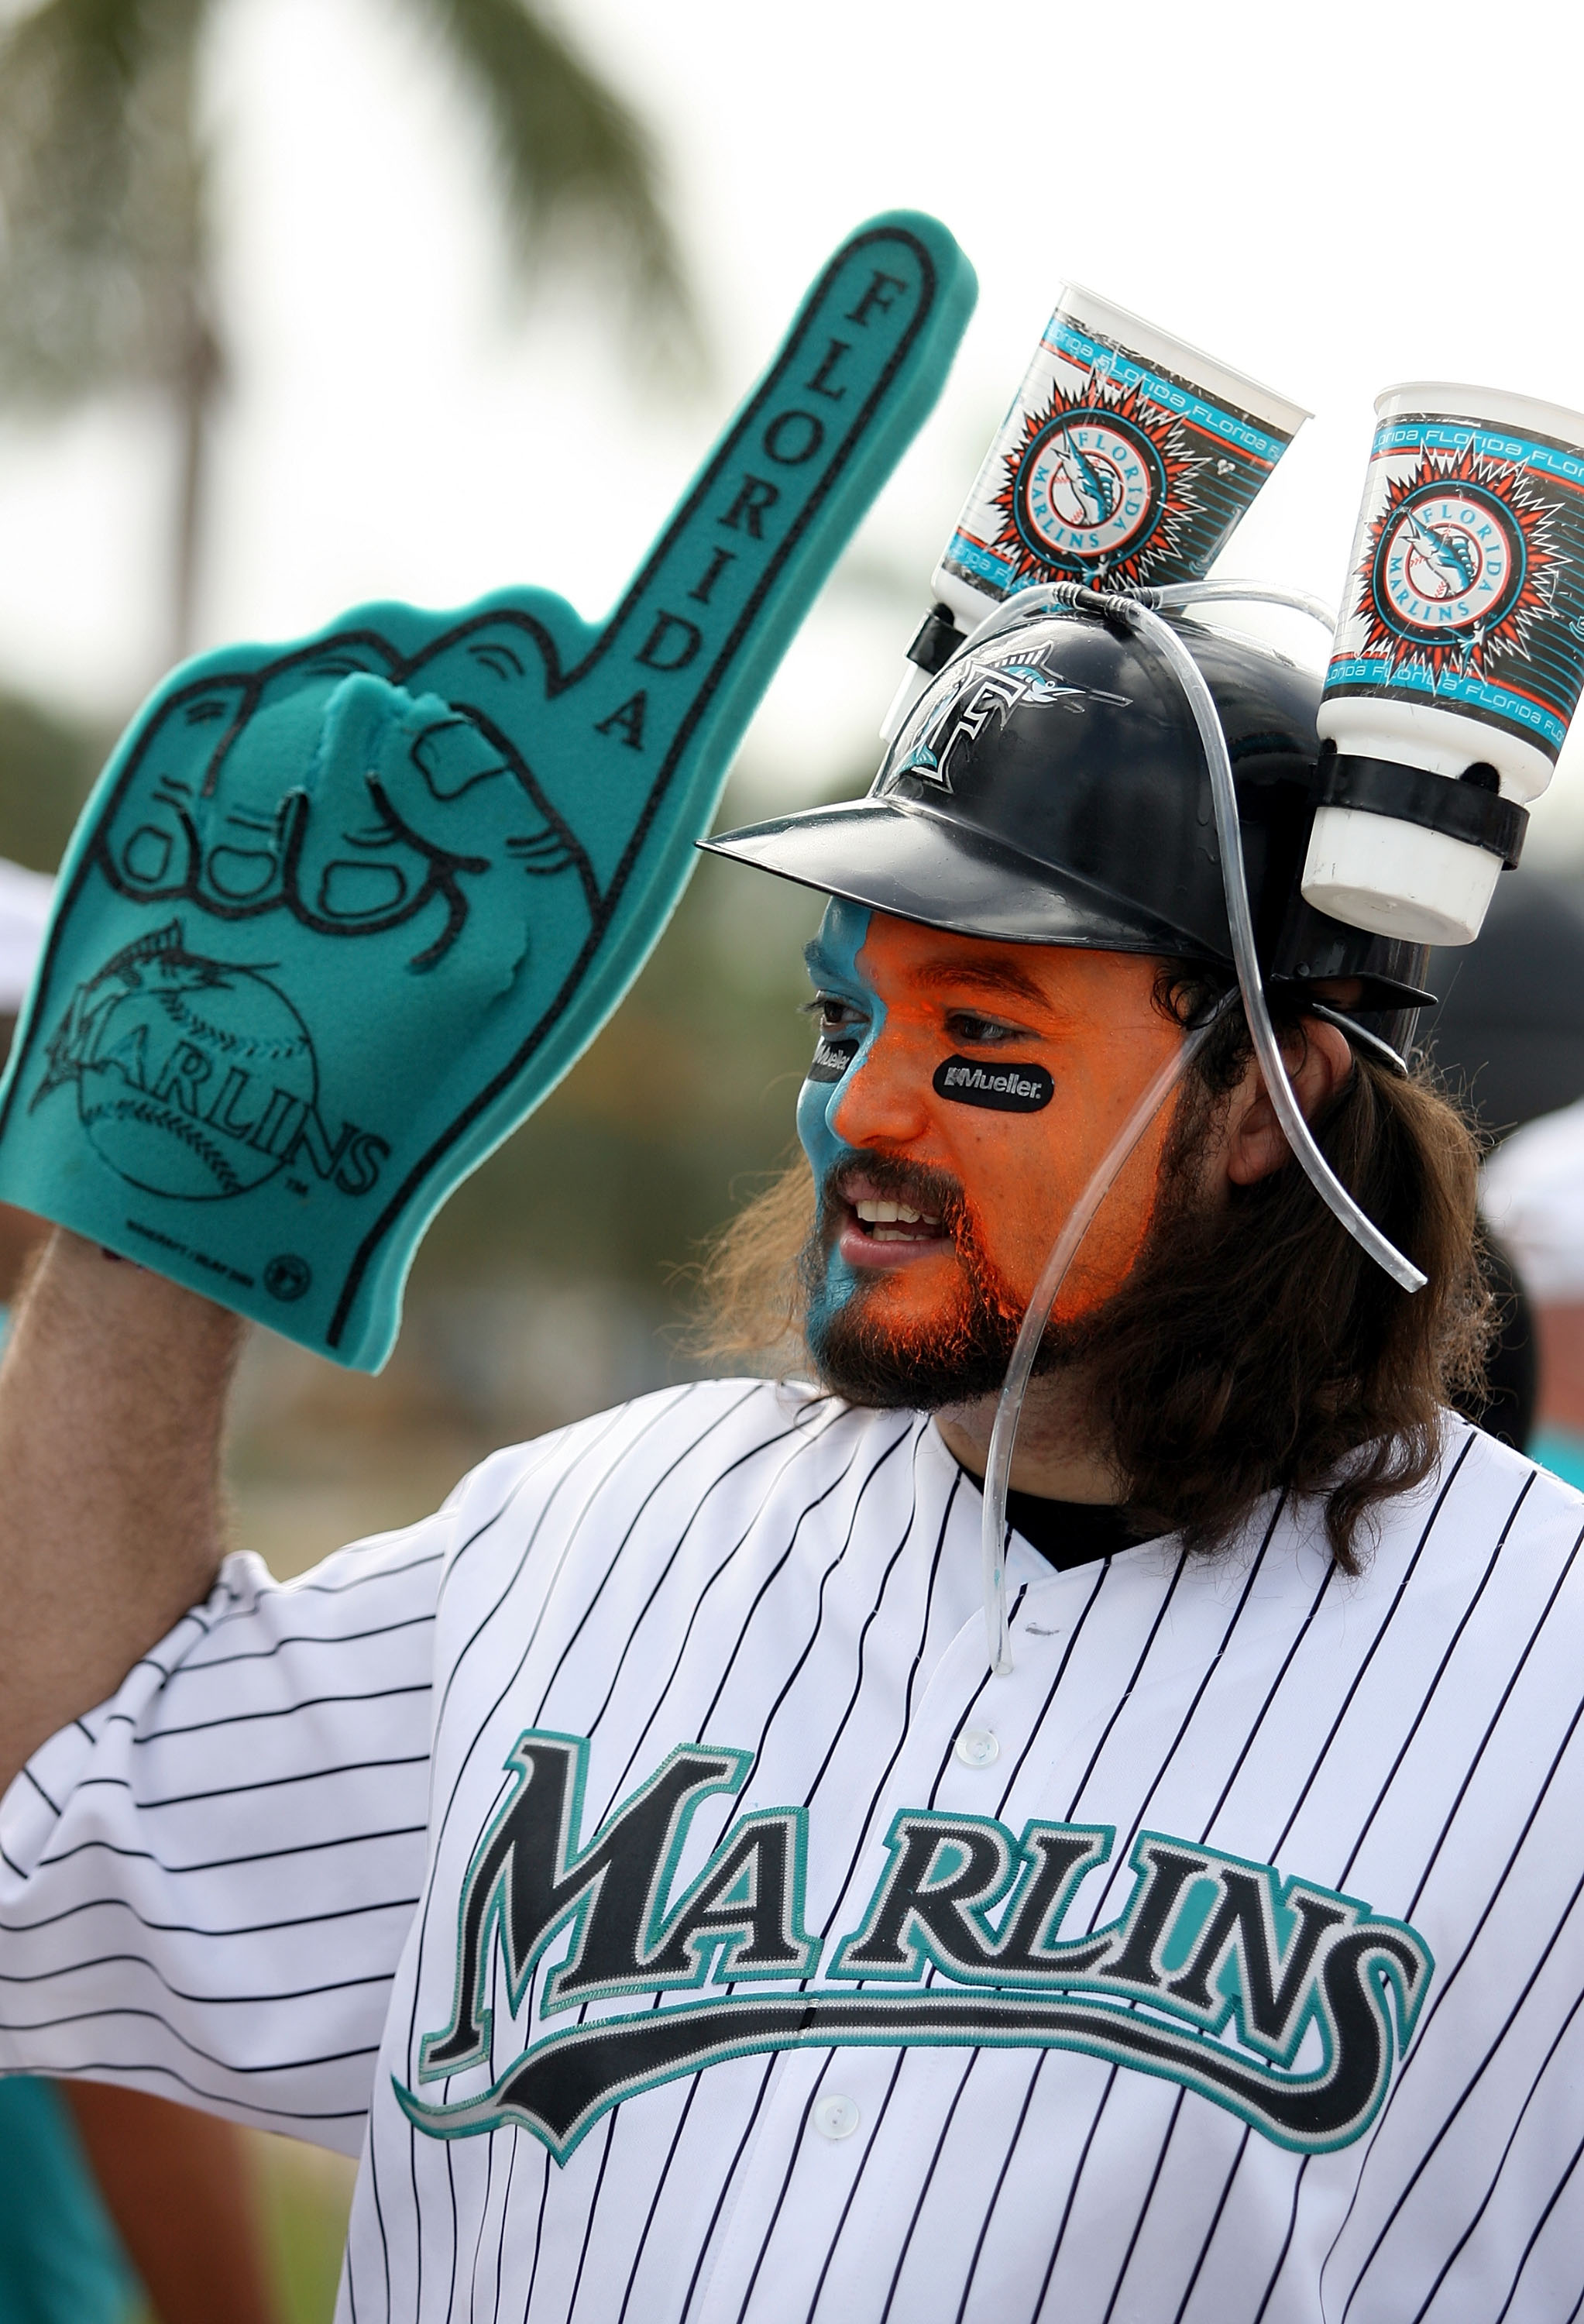 Why Hanley Ramirez and the Florida Marlins Will Win the 2011 MLB